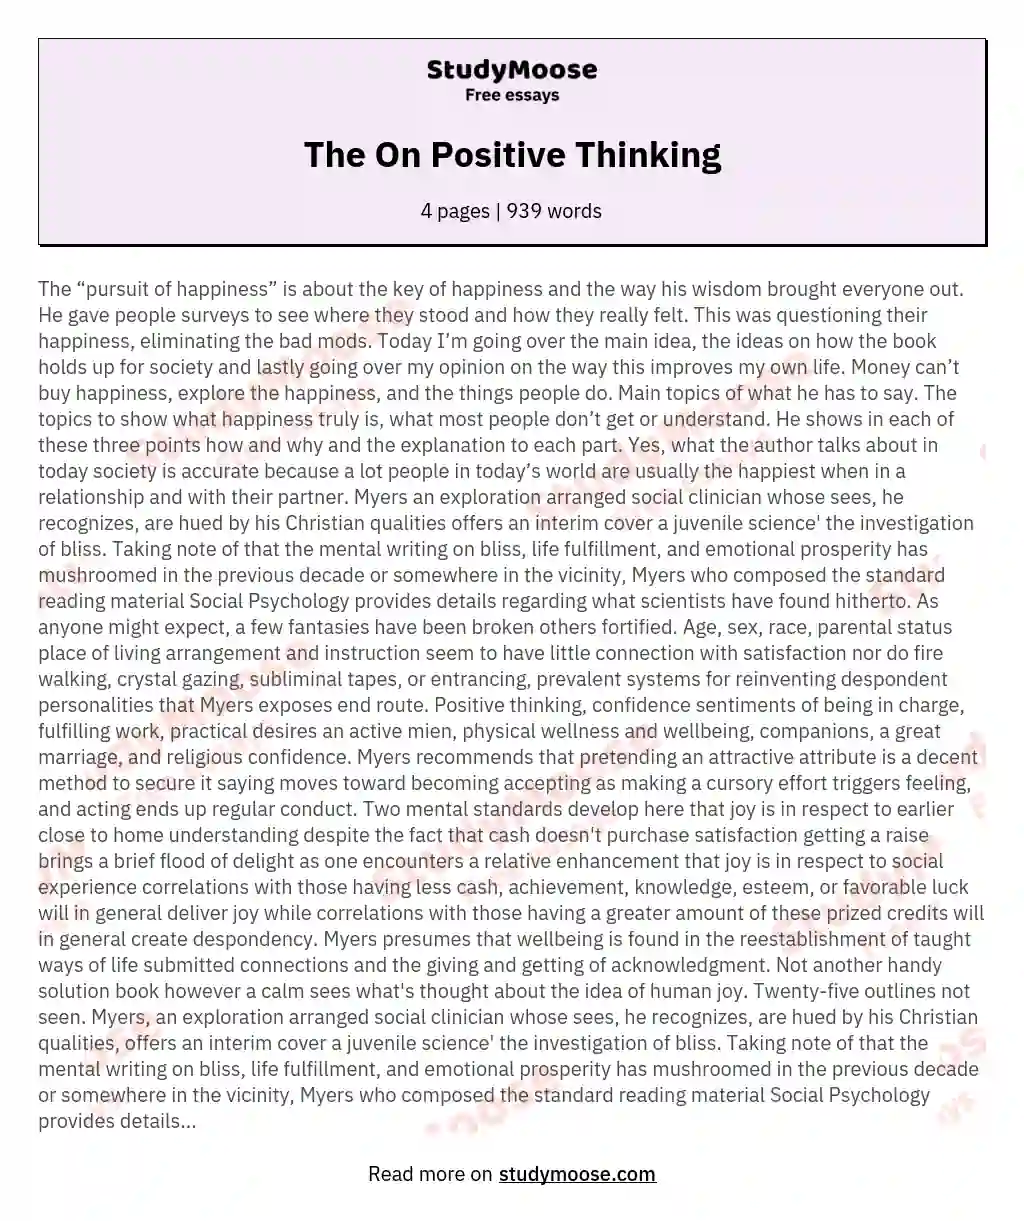 The On Positive Thinking essay